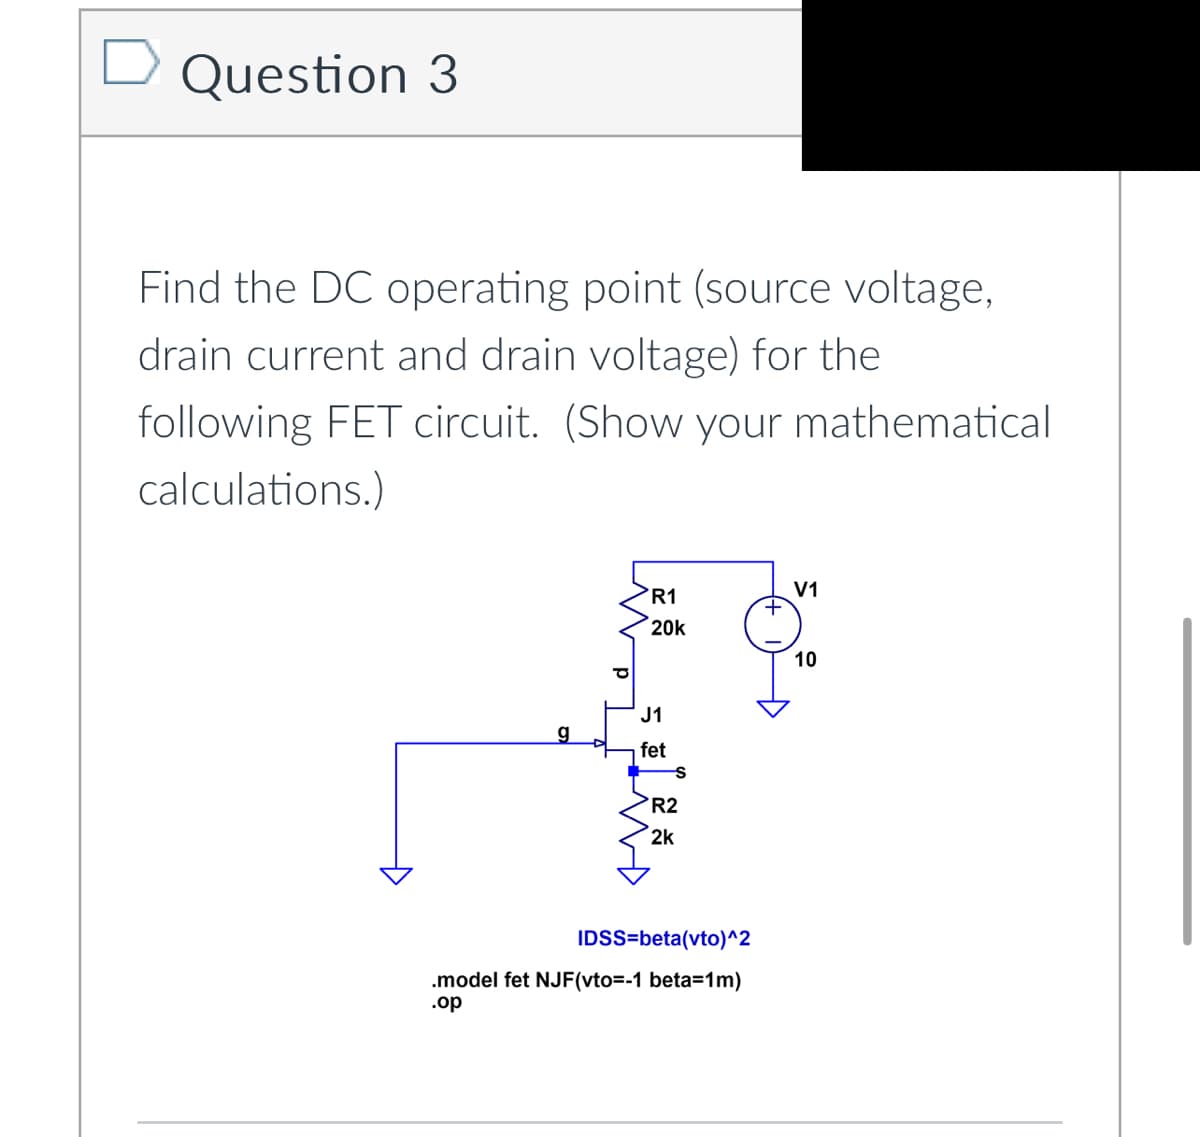 Question 3
Find the DC operating point (source voltage,
drain current and drain voltage) for the
following FET circuit. (Show your mathematical
calculations.)
Đ
g
R1
20k
J1
fet
R2
2k
IDSS=beta(vto)^2
.model fet NJF(vto=-1 beta=1m)
.op
+
V1
10